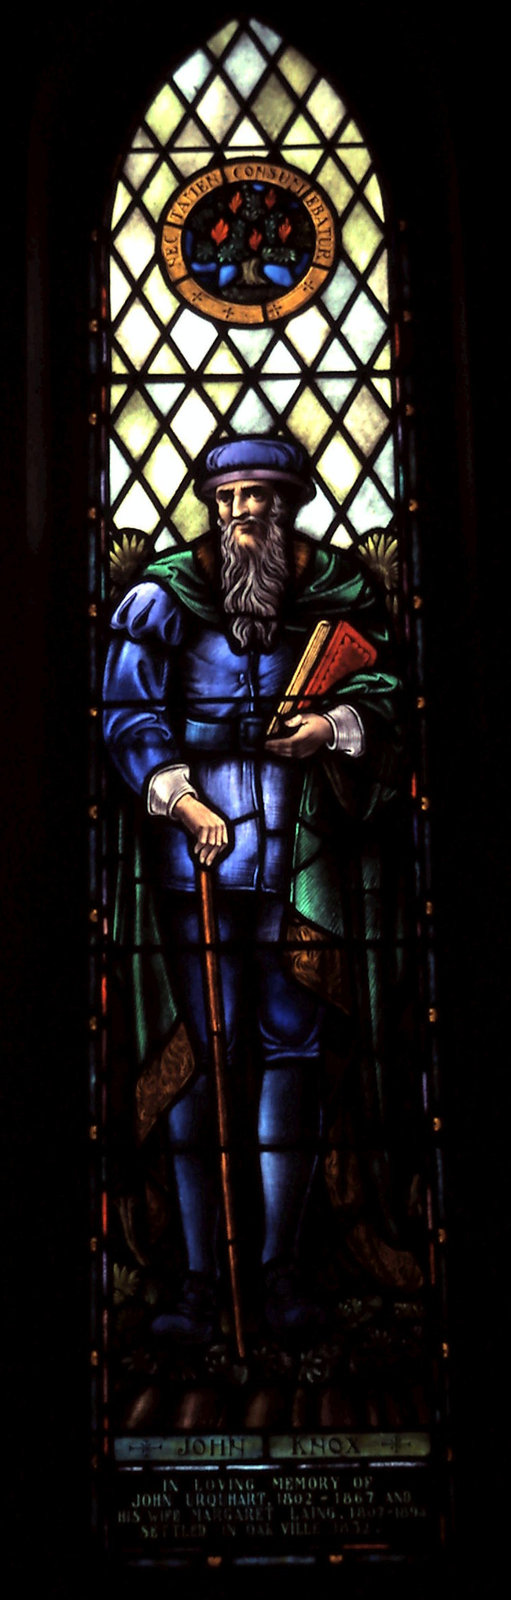 Stained glass dedicated to John Urquhart